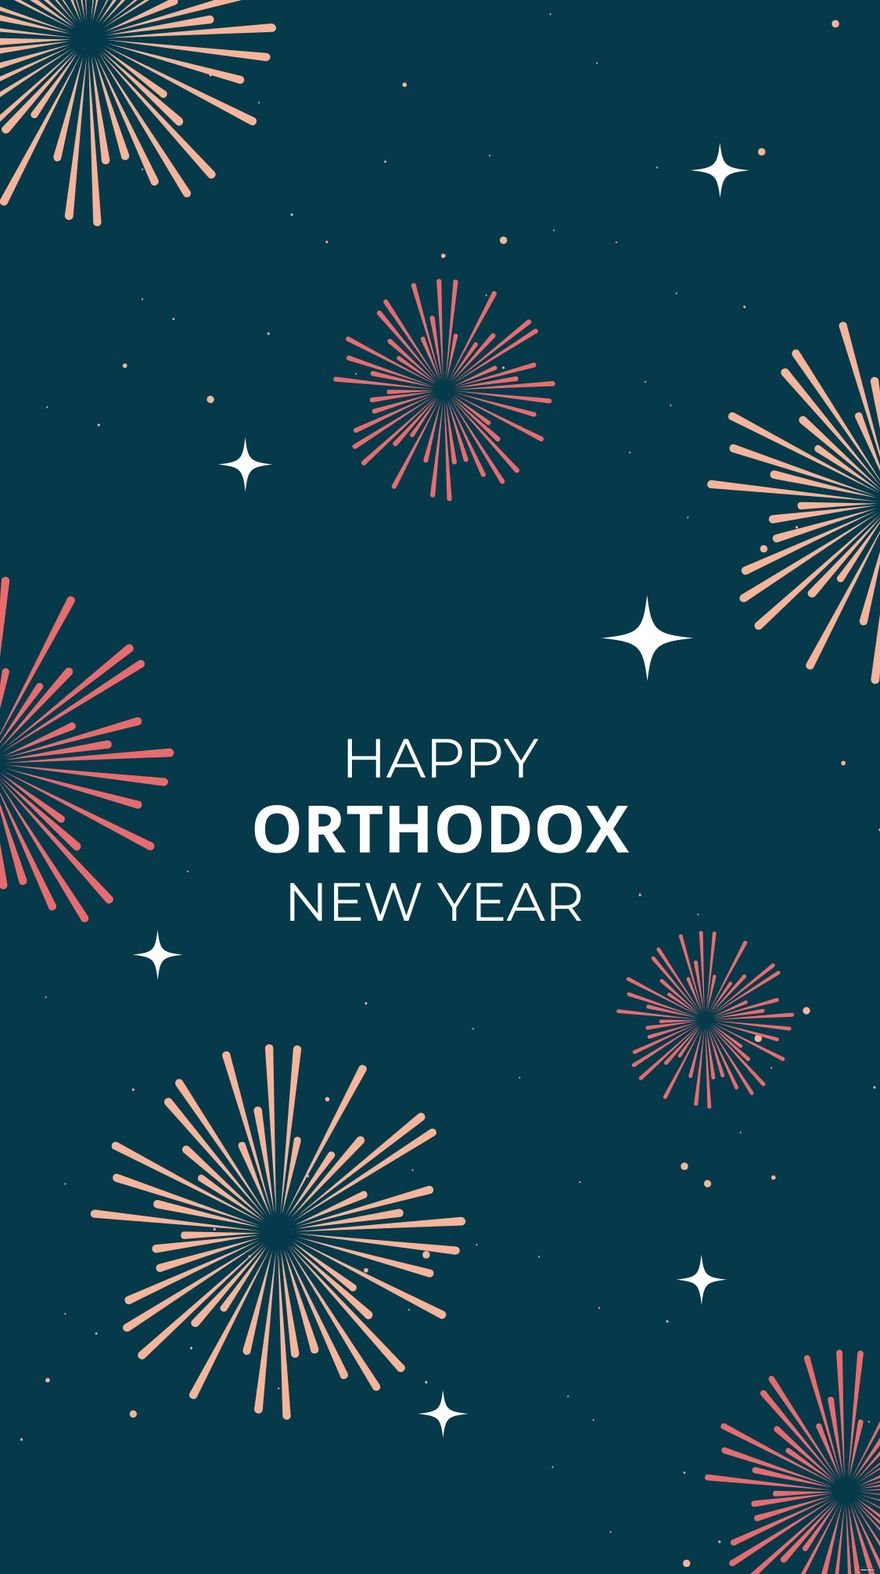 Free Orthodox New Year iPhone Background in PDF, Illustrator, PSD, EPS, SVG, PNG, JPEG